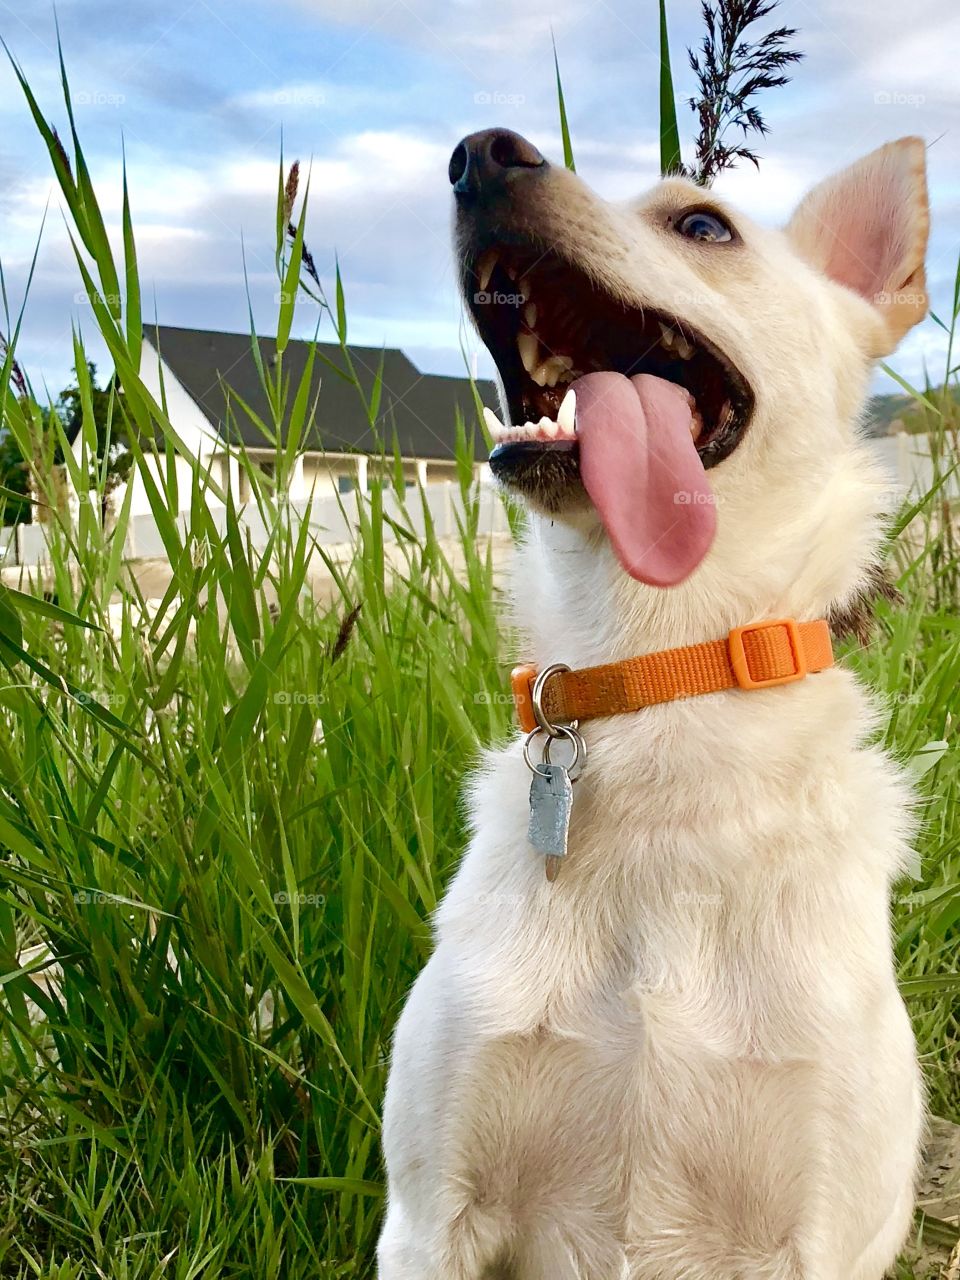 A silly Siberian Husky/Pomeranian (pomsky) pup with a long tongue posing for pictures looking admiringly up at his owner during and evening trip to the local dog park.